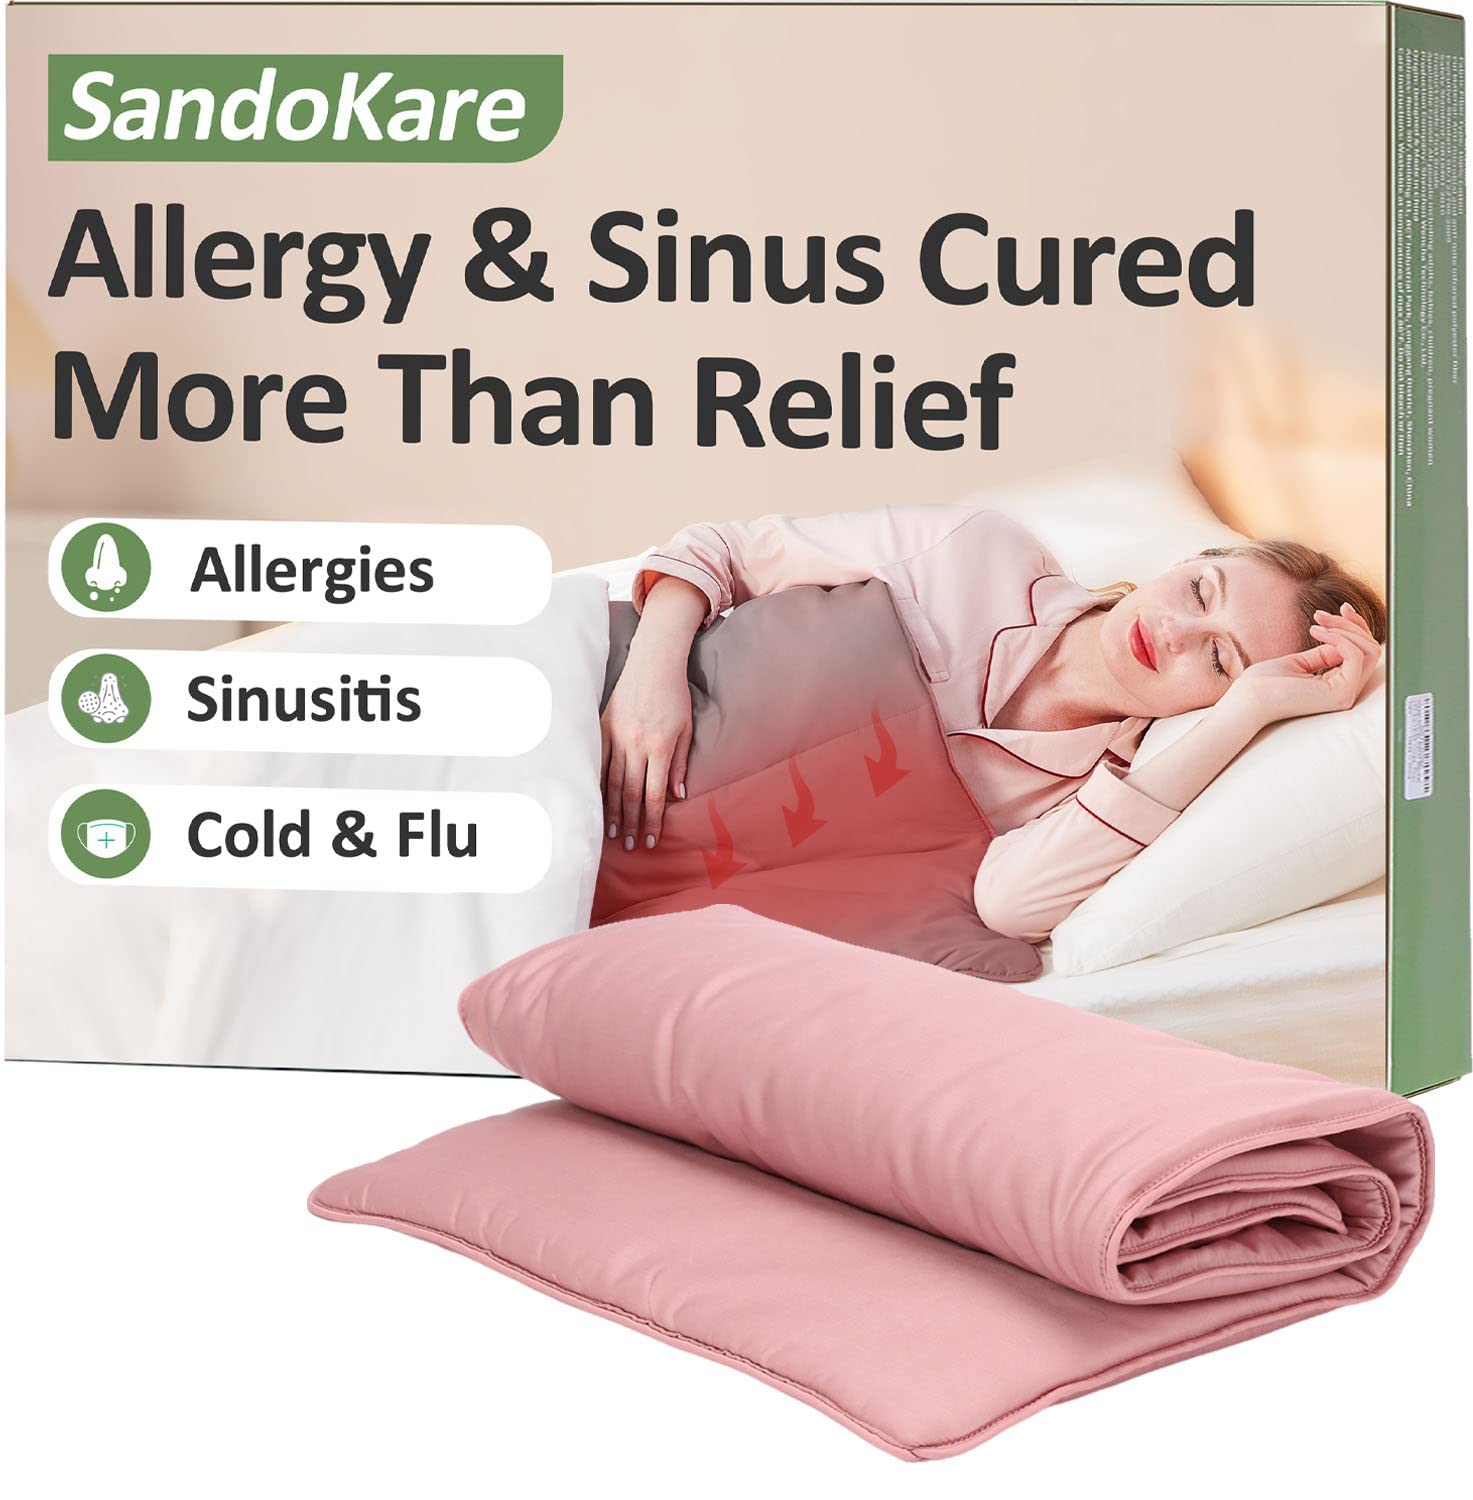 Nasal Allergy Relief Blanket, Drug-Free Nasal Care for Sinus Relief, Ease Seasonal Allergic Rhinitis, Hay Fever, Snoring, Nose Breathing, Non-Drowsy Safe for Baby, Kid, Child, Adult